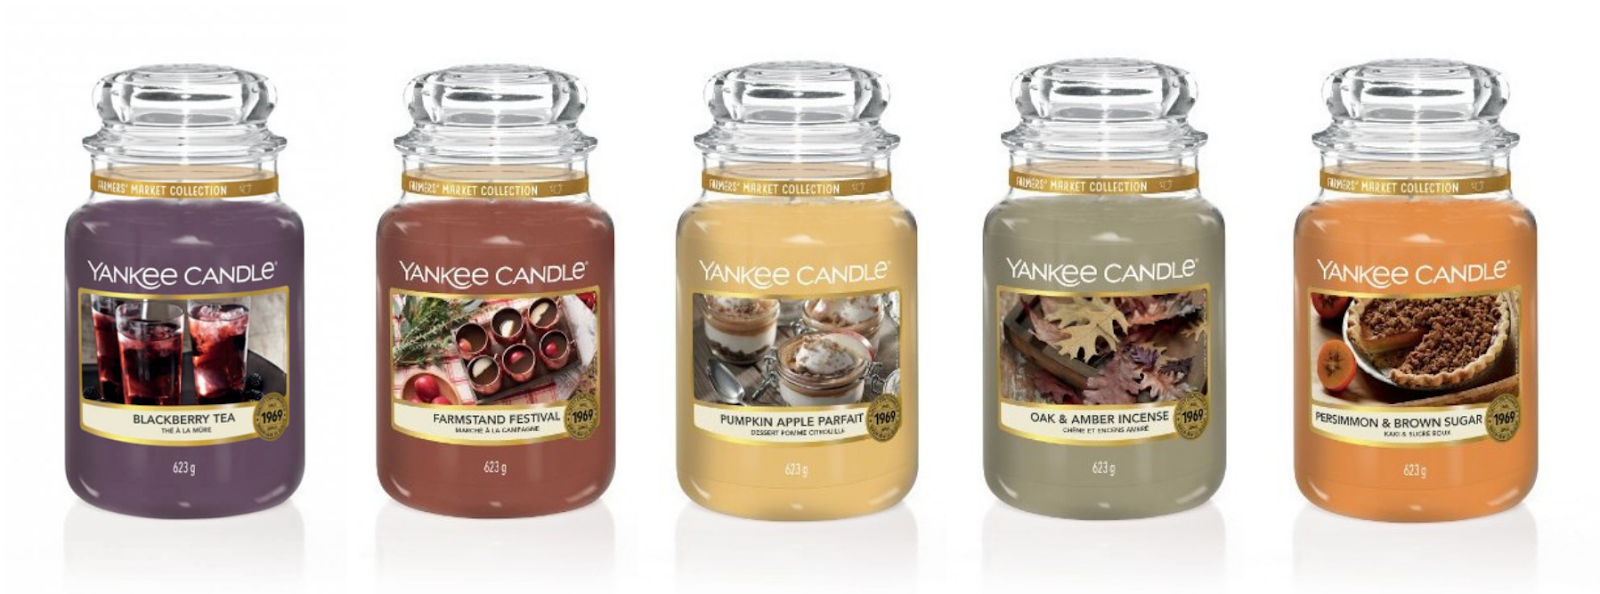 Farmer's-Market-Yankee-Candle-limited-edition